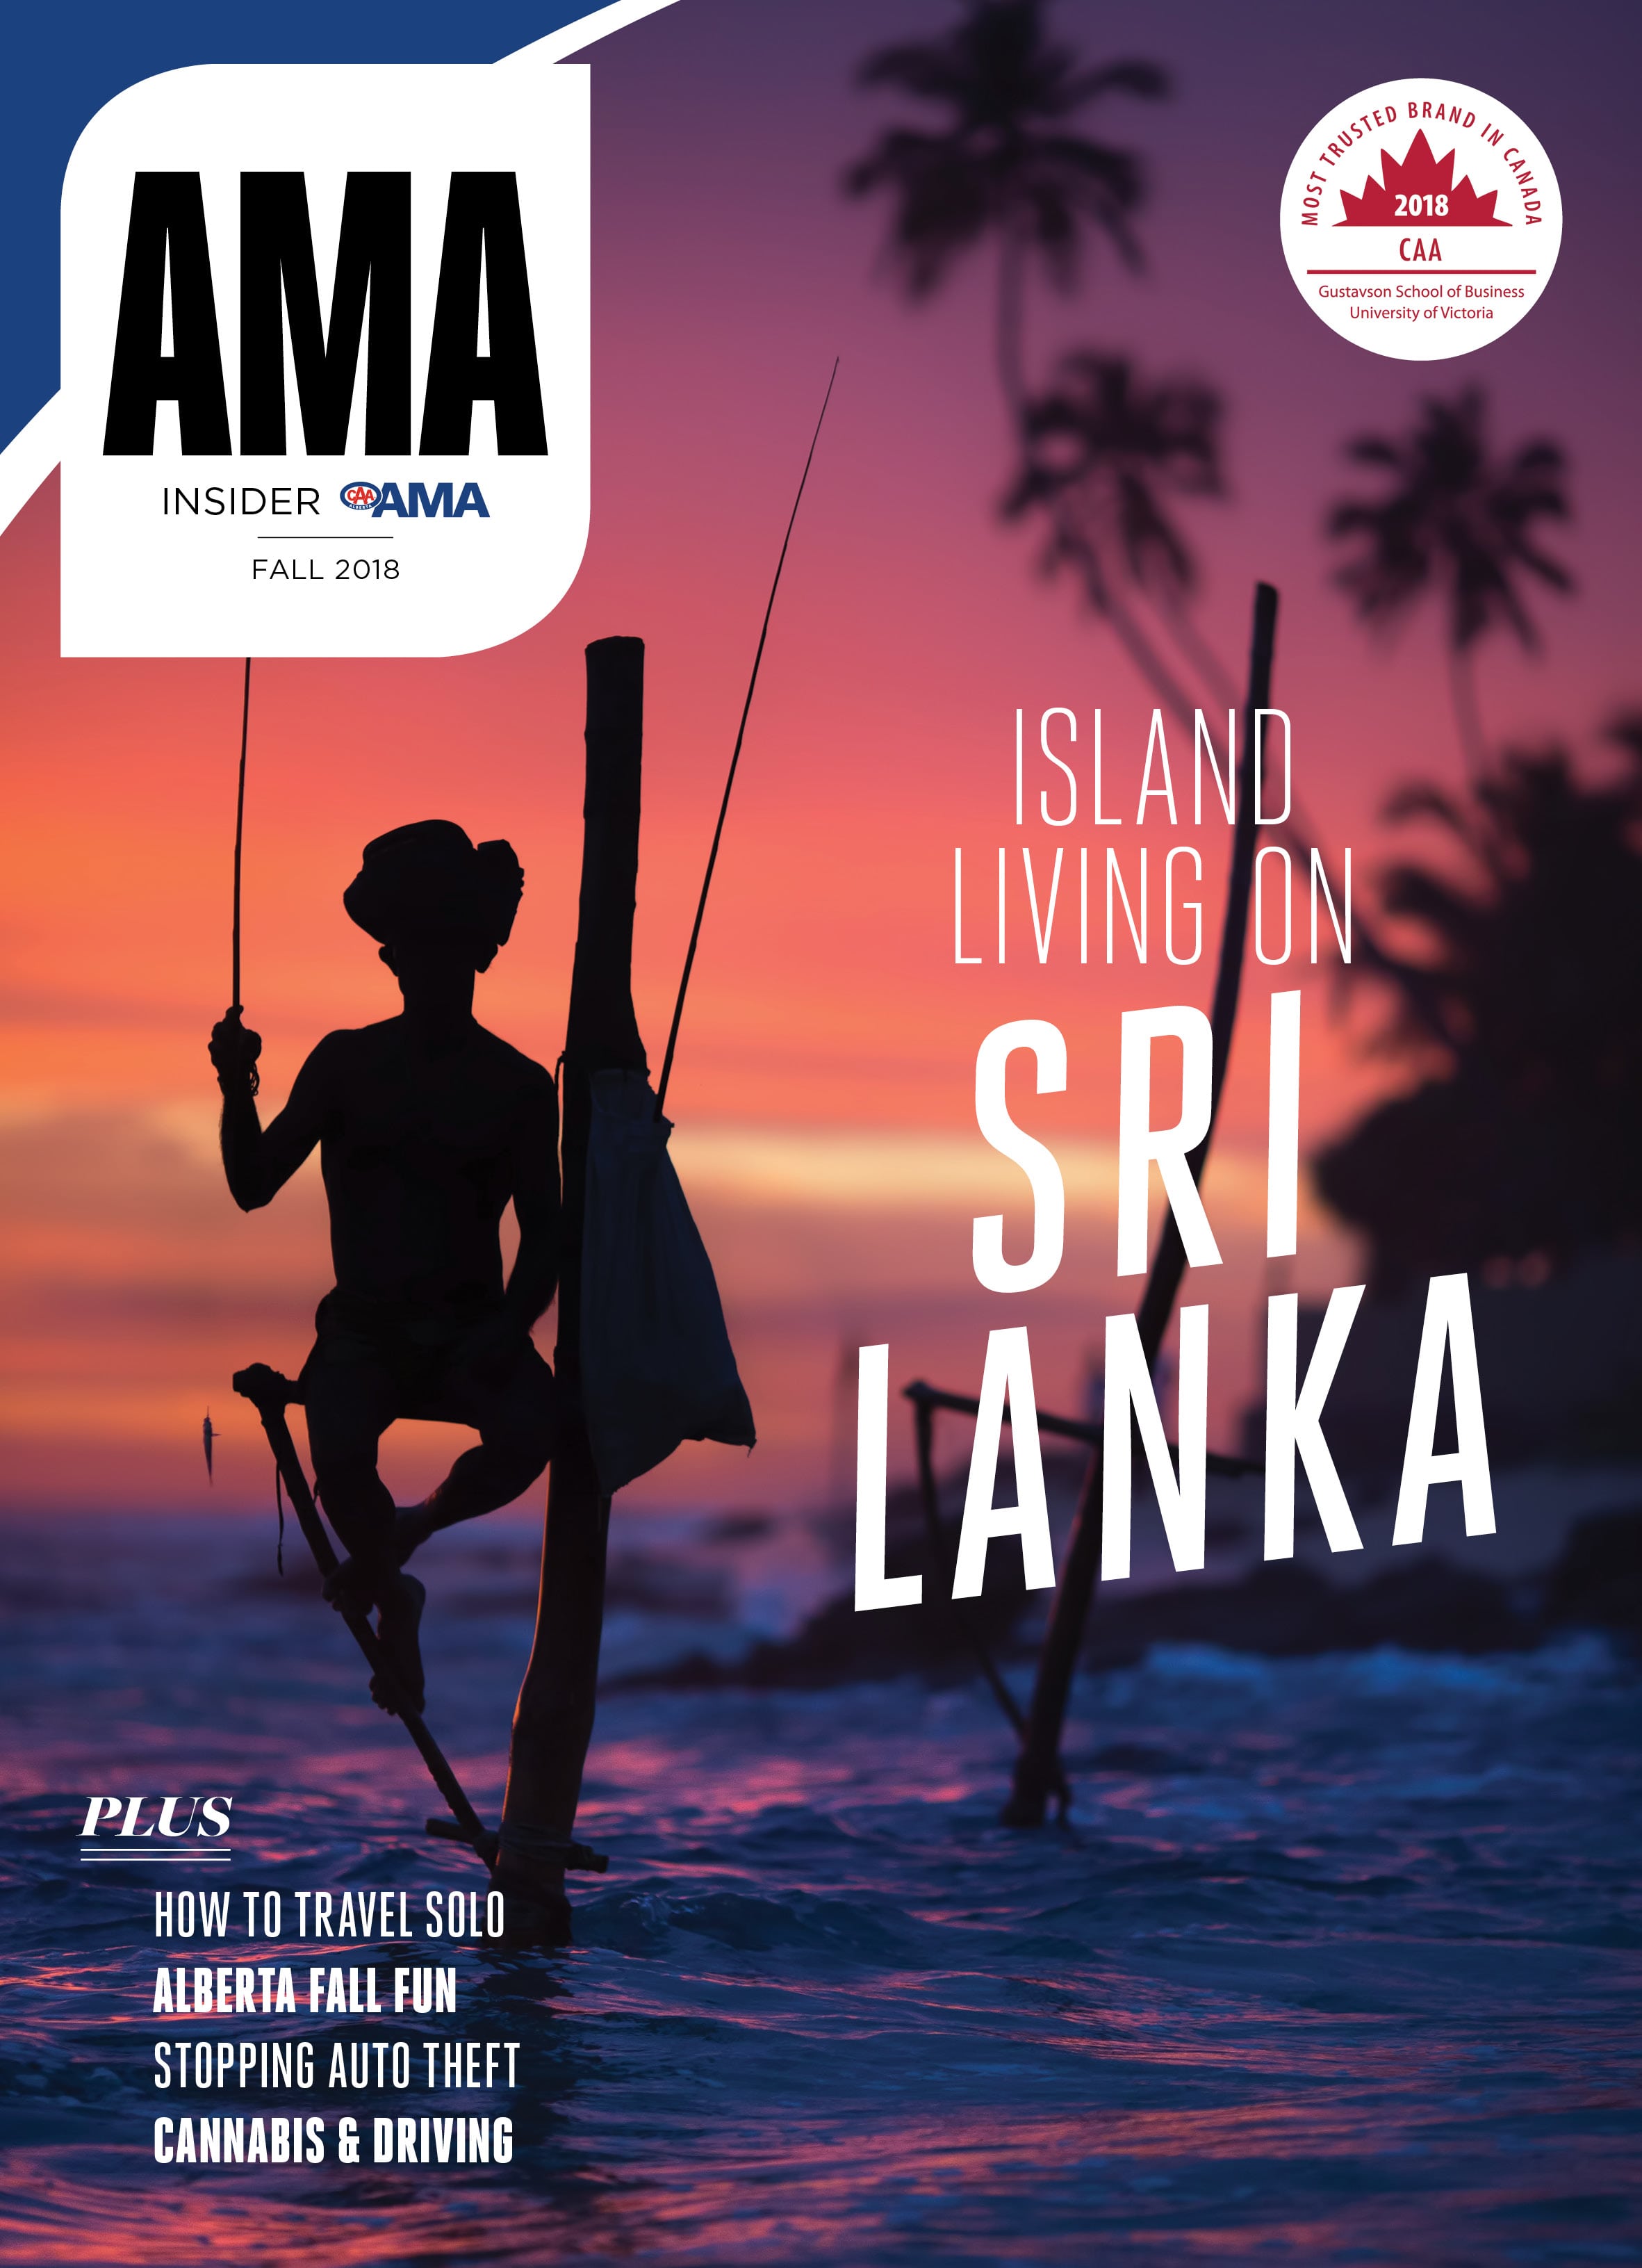 Cover of AMA Insider Magazine fall 2018 with a man sitting on the beach in Sri Lanka.